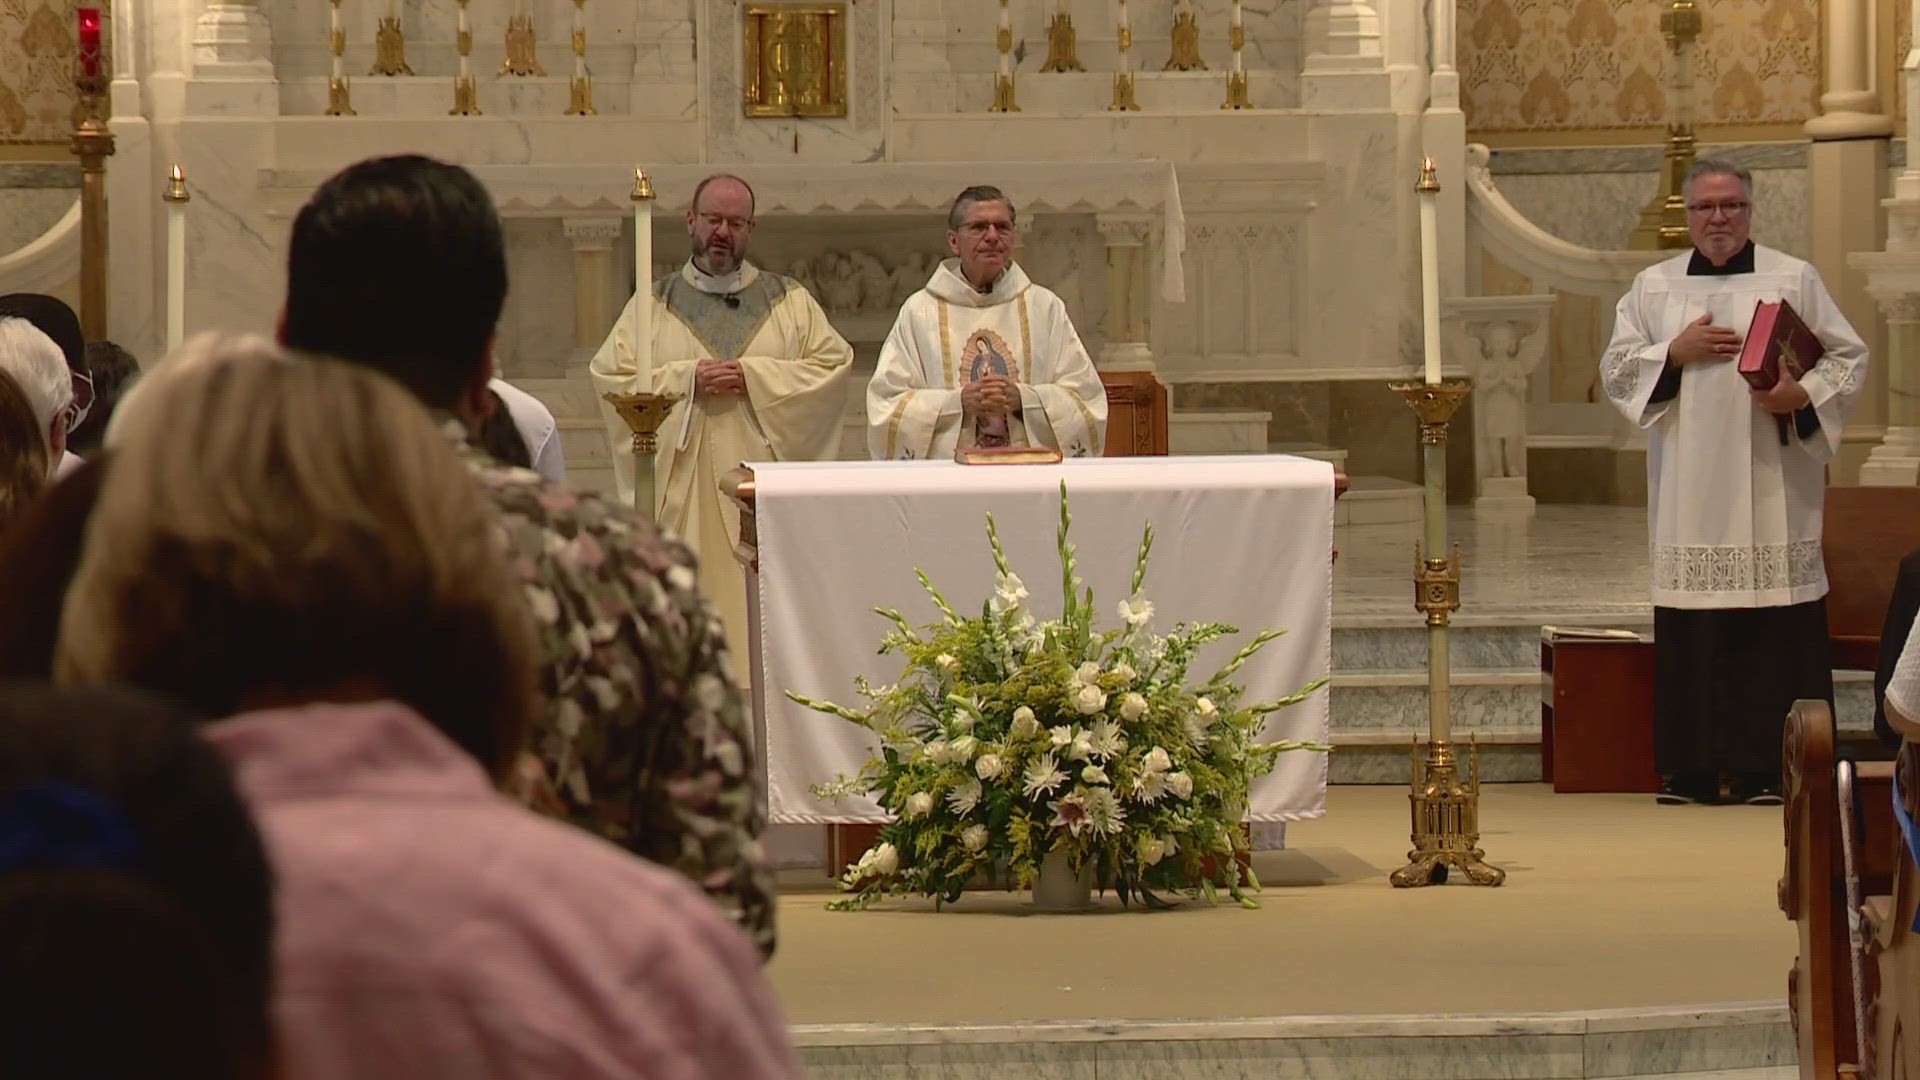 A special mass with San Antonio's archbishop was held to commemorate the anniversary.